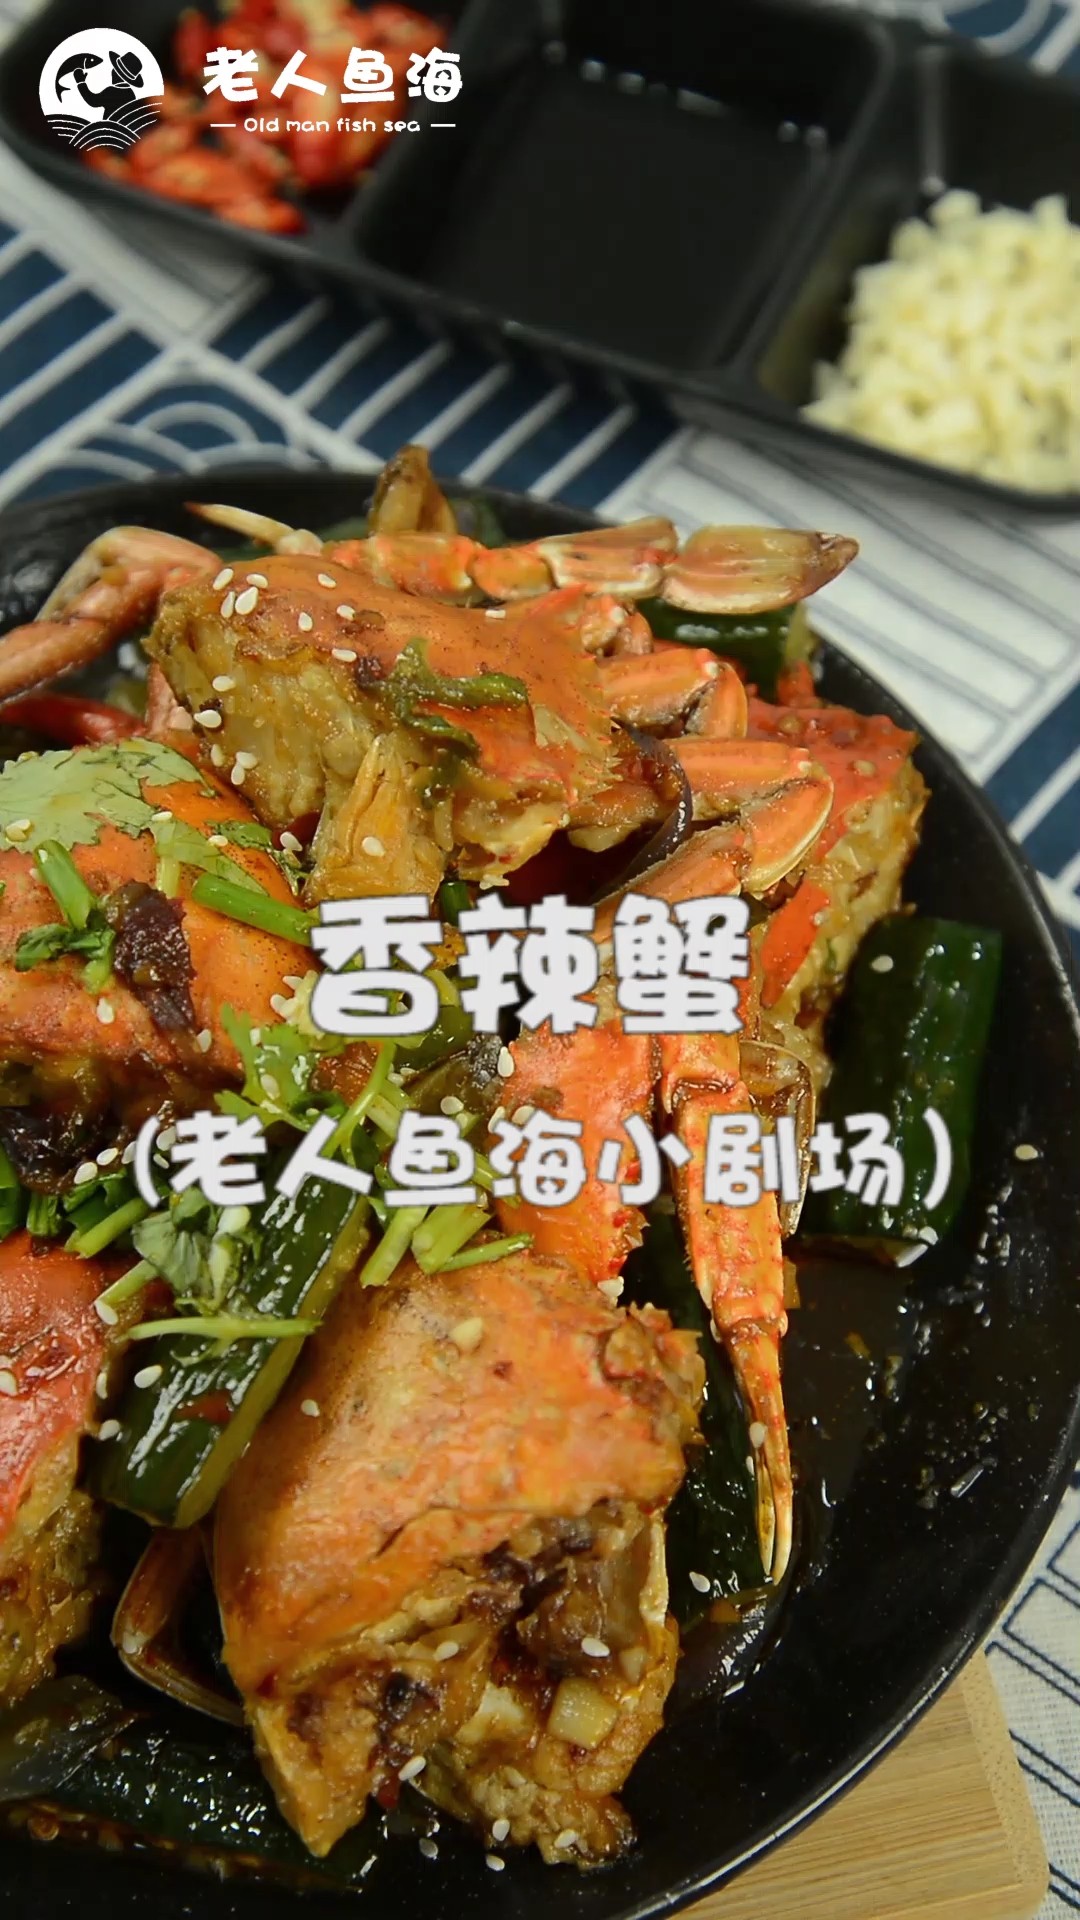 Homemade Spicy Crab at Home, Life is Full of Joy and Taste